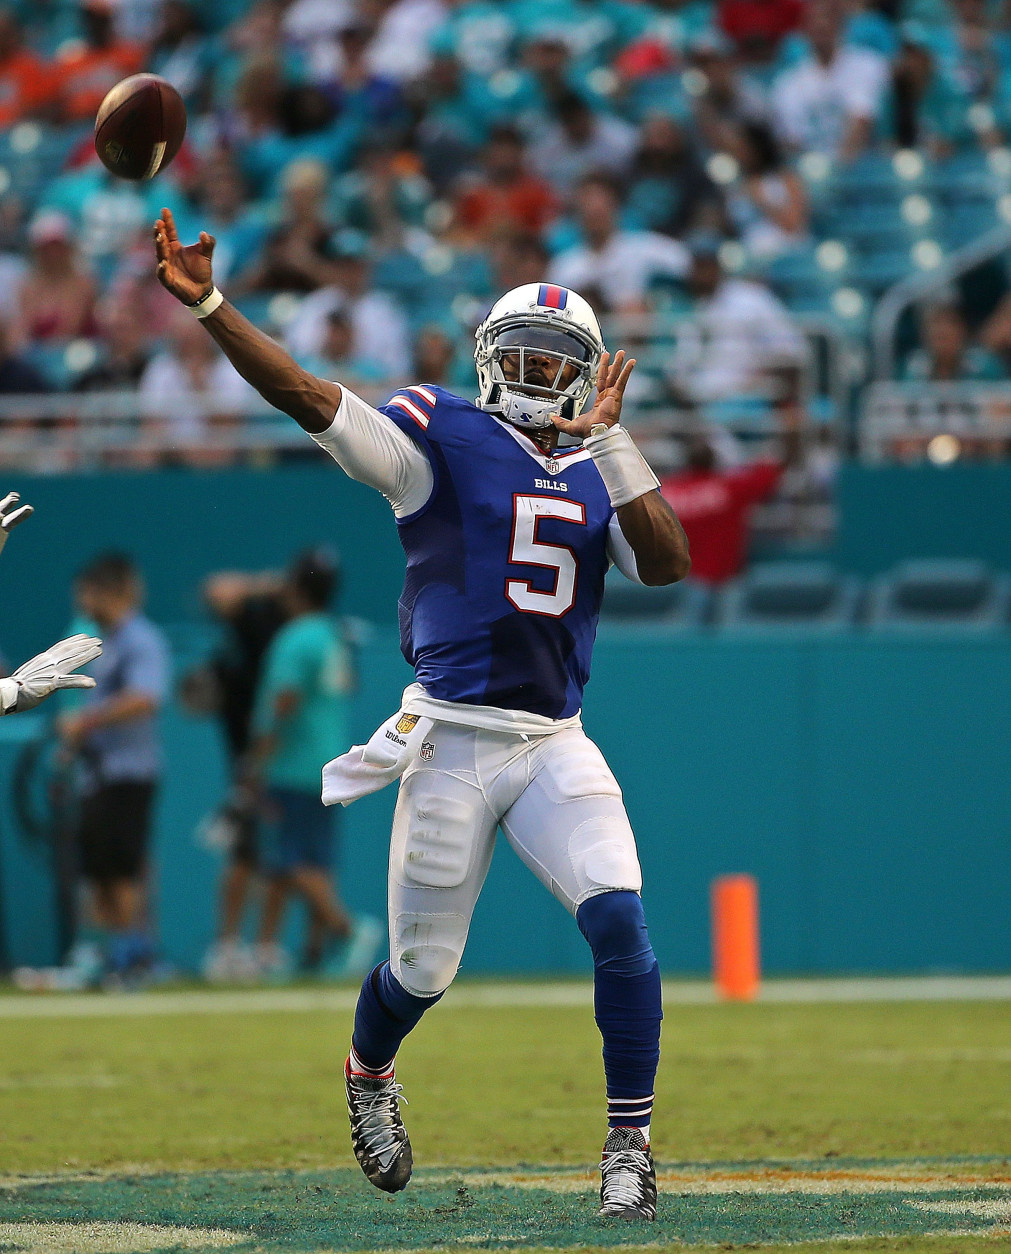 MIAMI GARDENS, FL - SEPTEMBER 27:  Tyrod Taylor #5 of the Buffalo Bills passes during a game against the Miami Dolphins at Sun Life Stadium on September 27, 2015 in Miami Gardens, Florida.  (Photo by Mike Ehrmann/Getty Images)